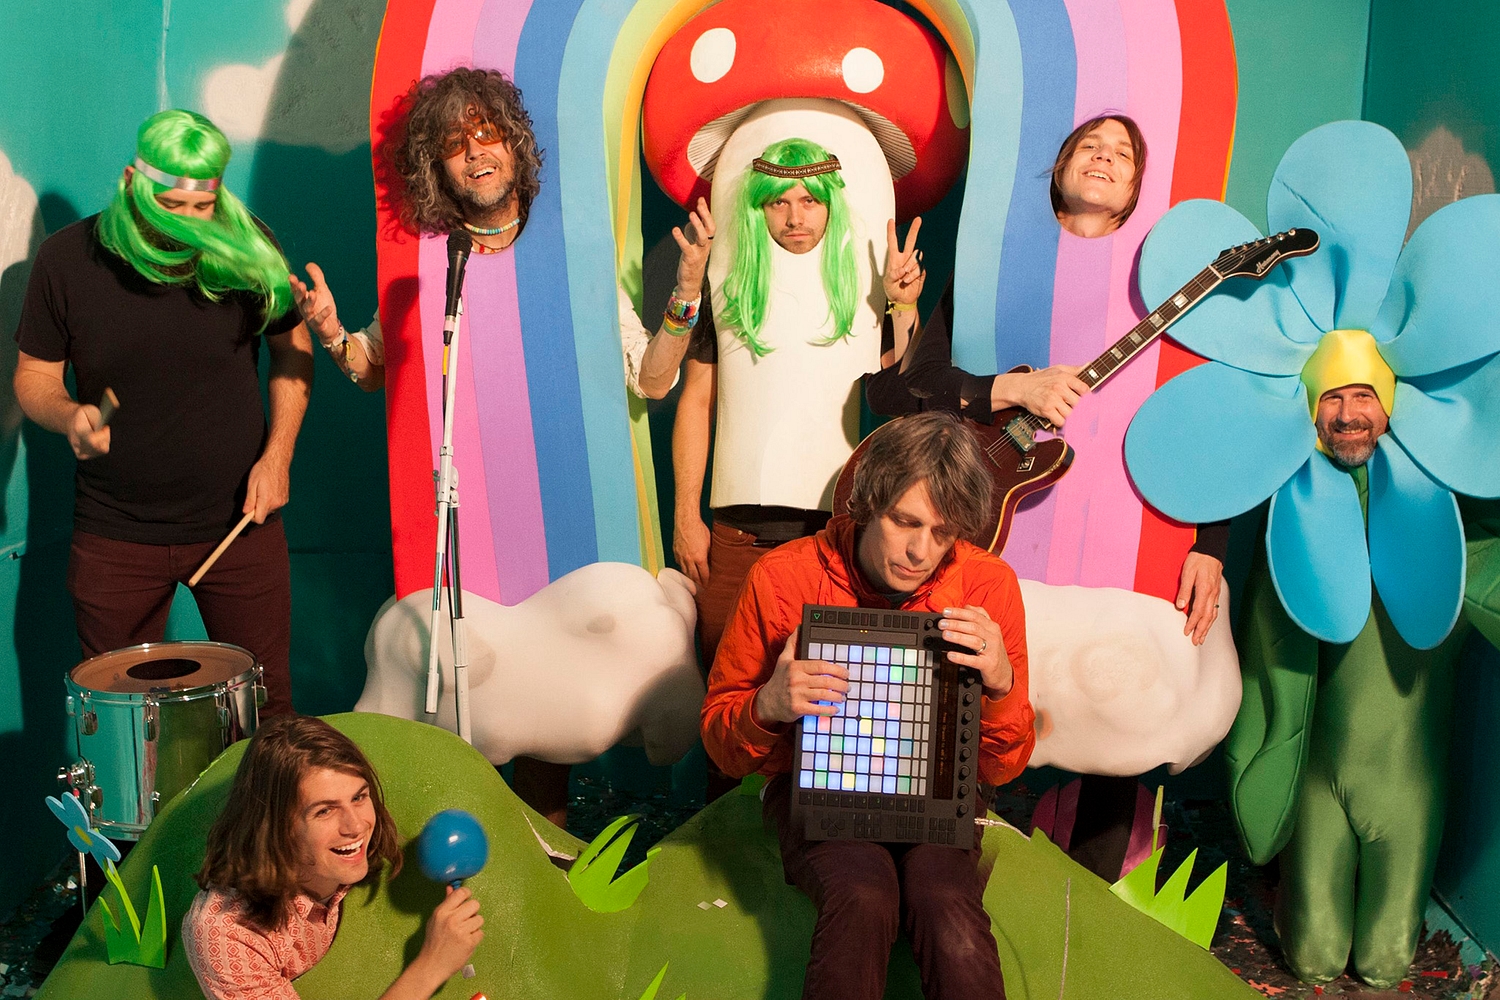 The Flaming Lips to headline Liverpool Sound City 2015